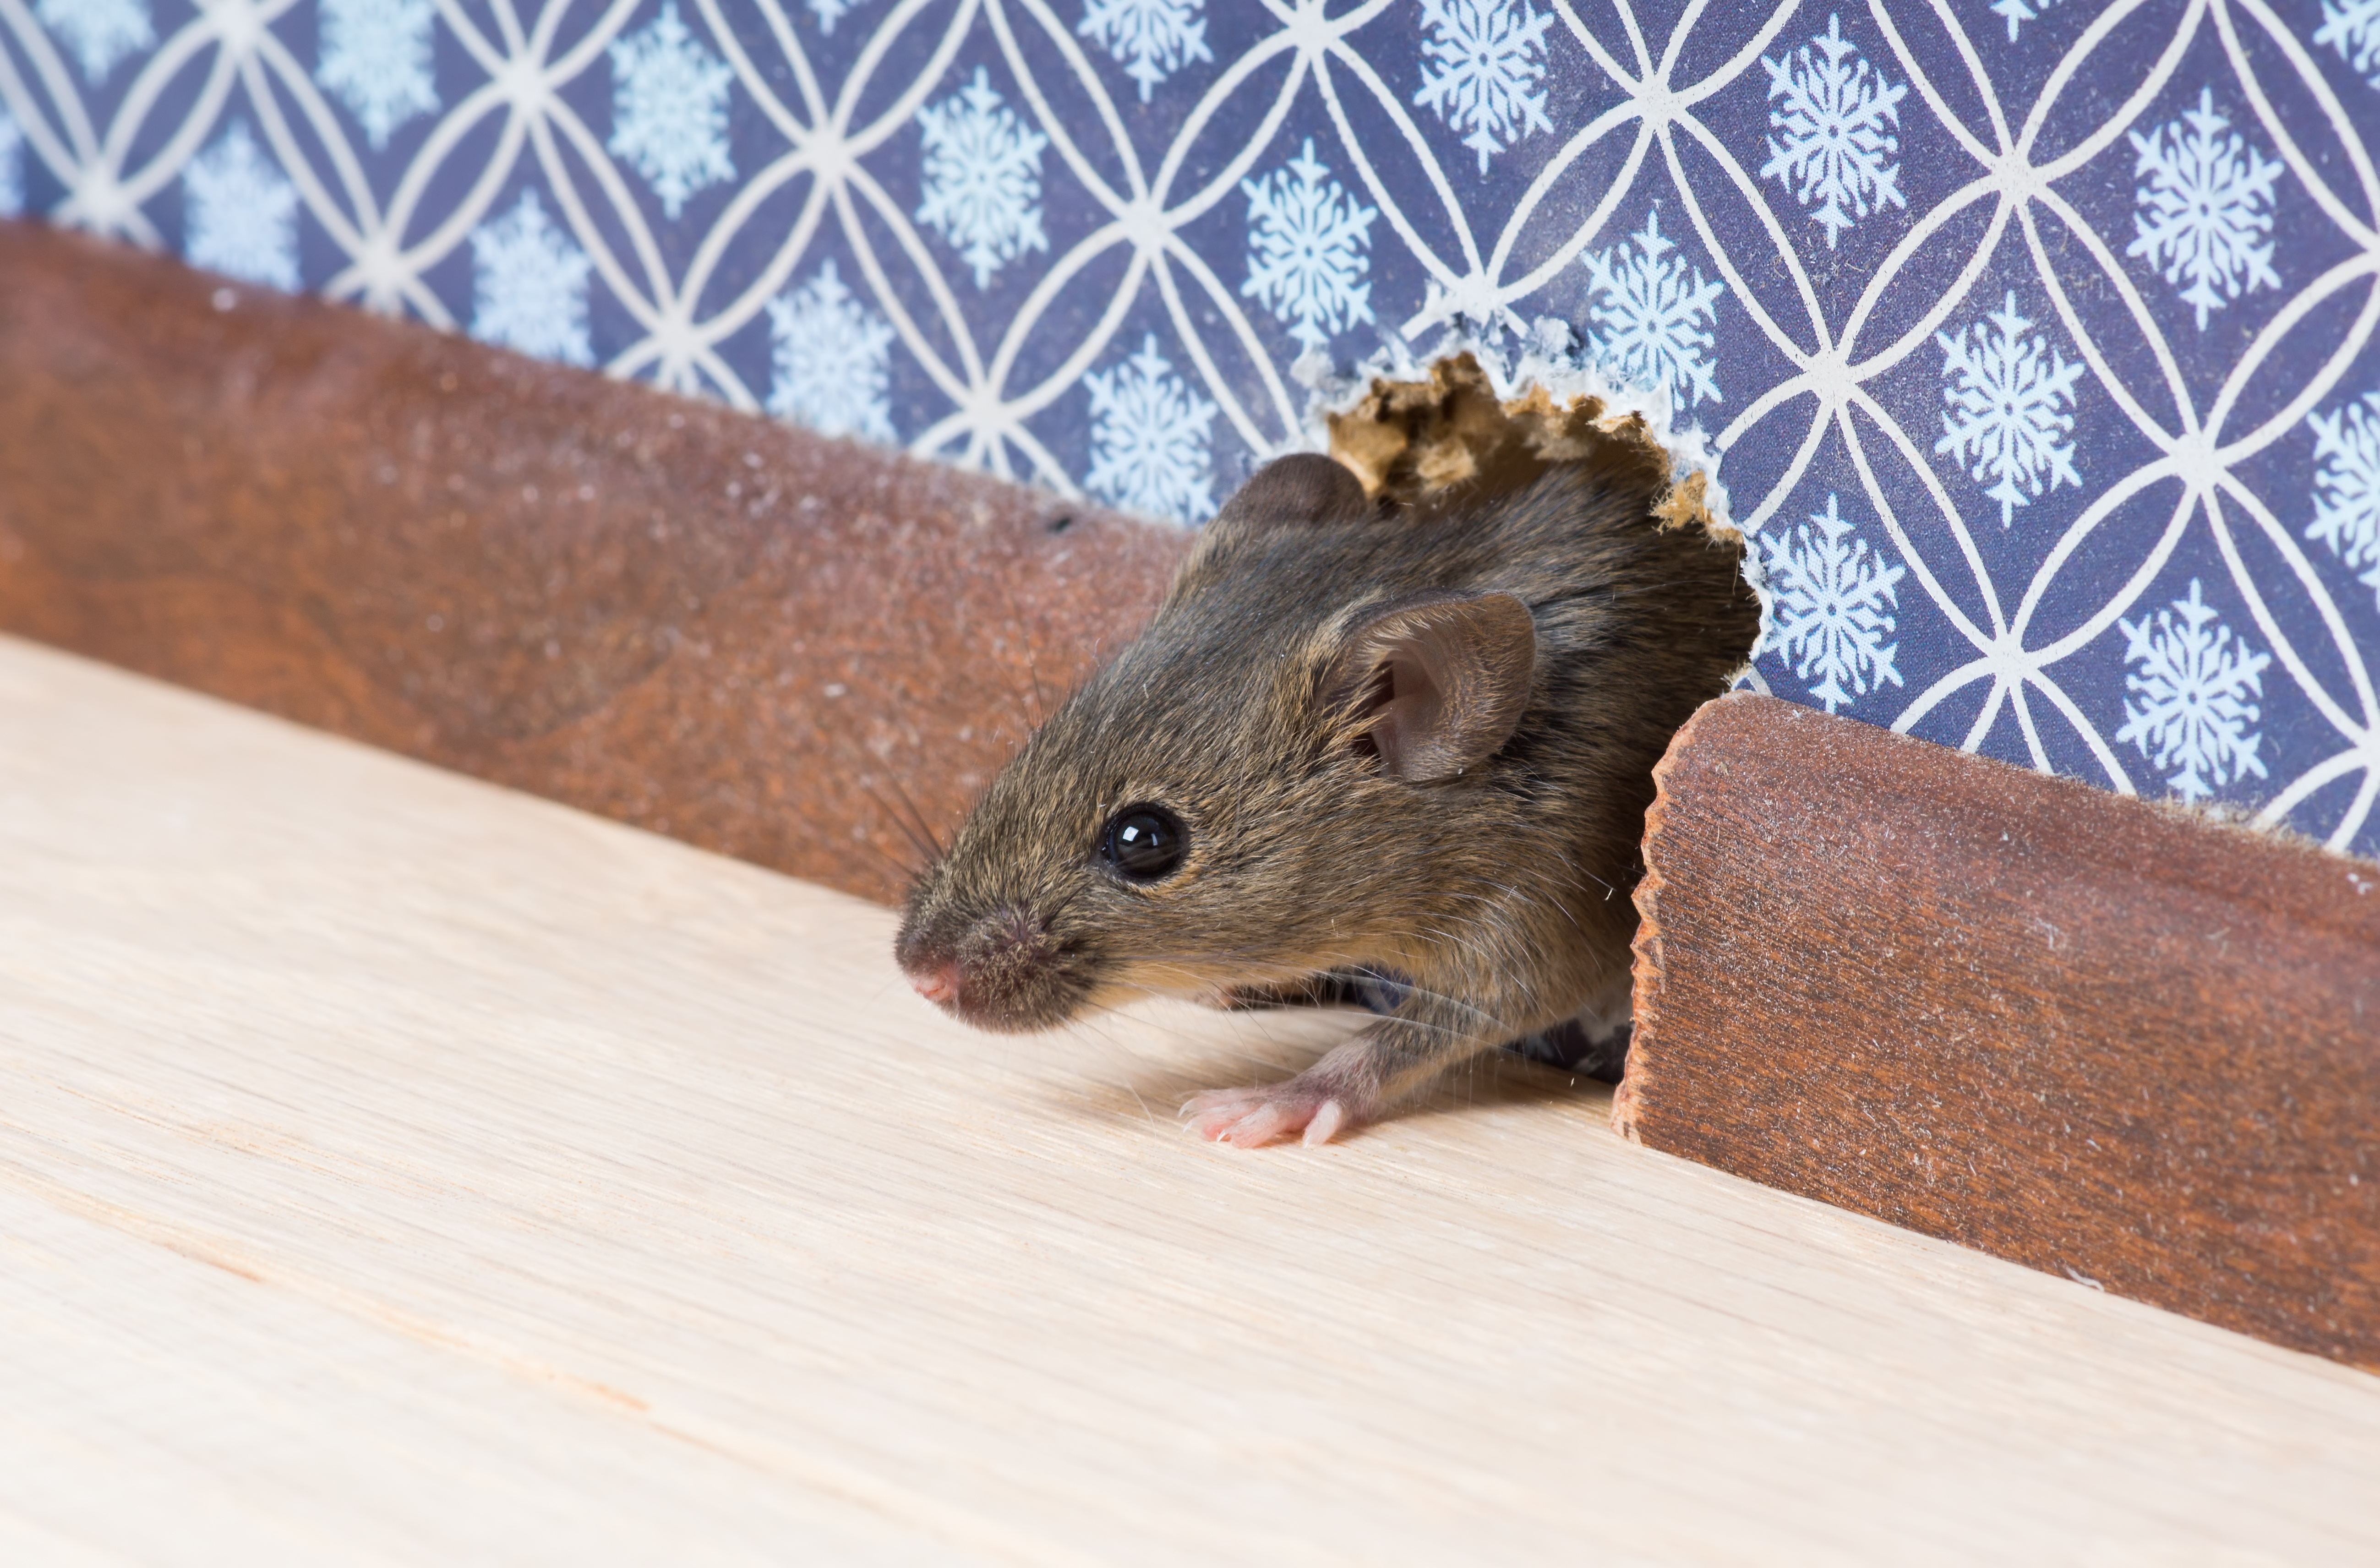 A mouse infiltrating a home - contact GGA to learn the best ways to prevent a rodent infestation in your home.